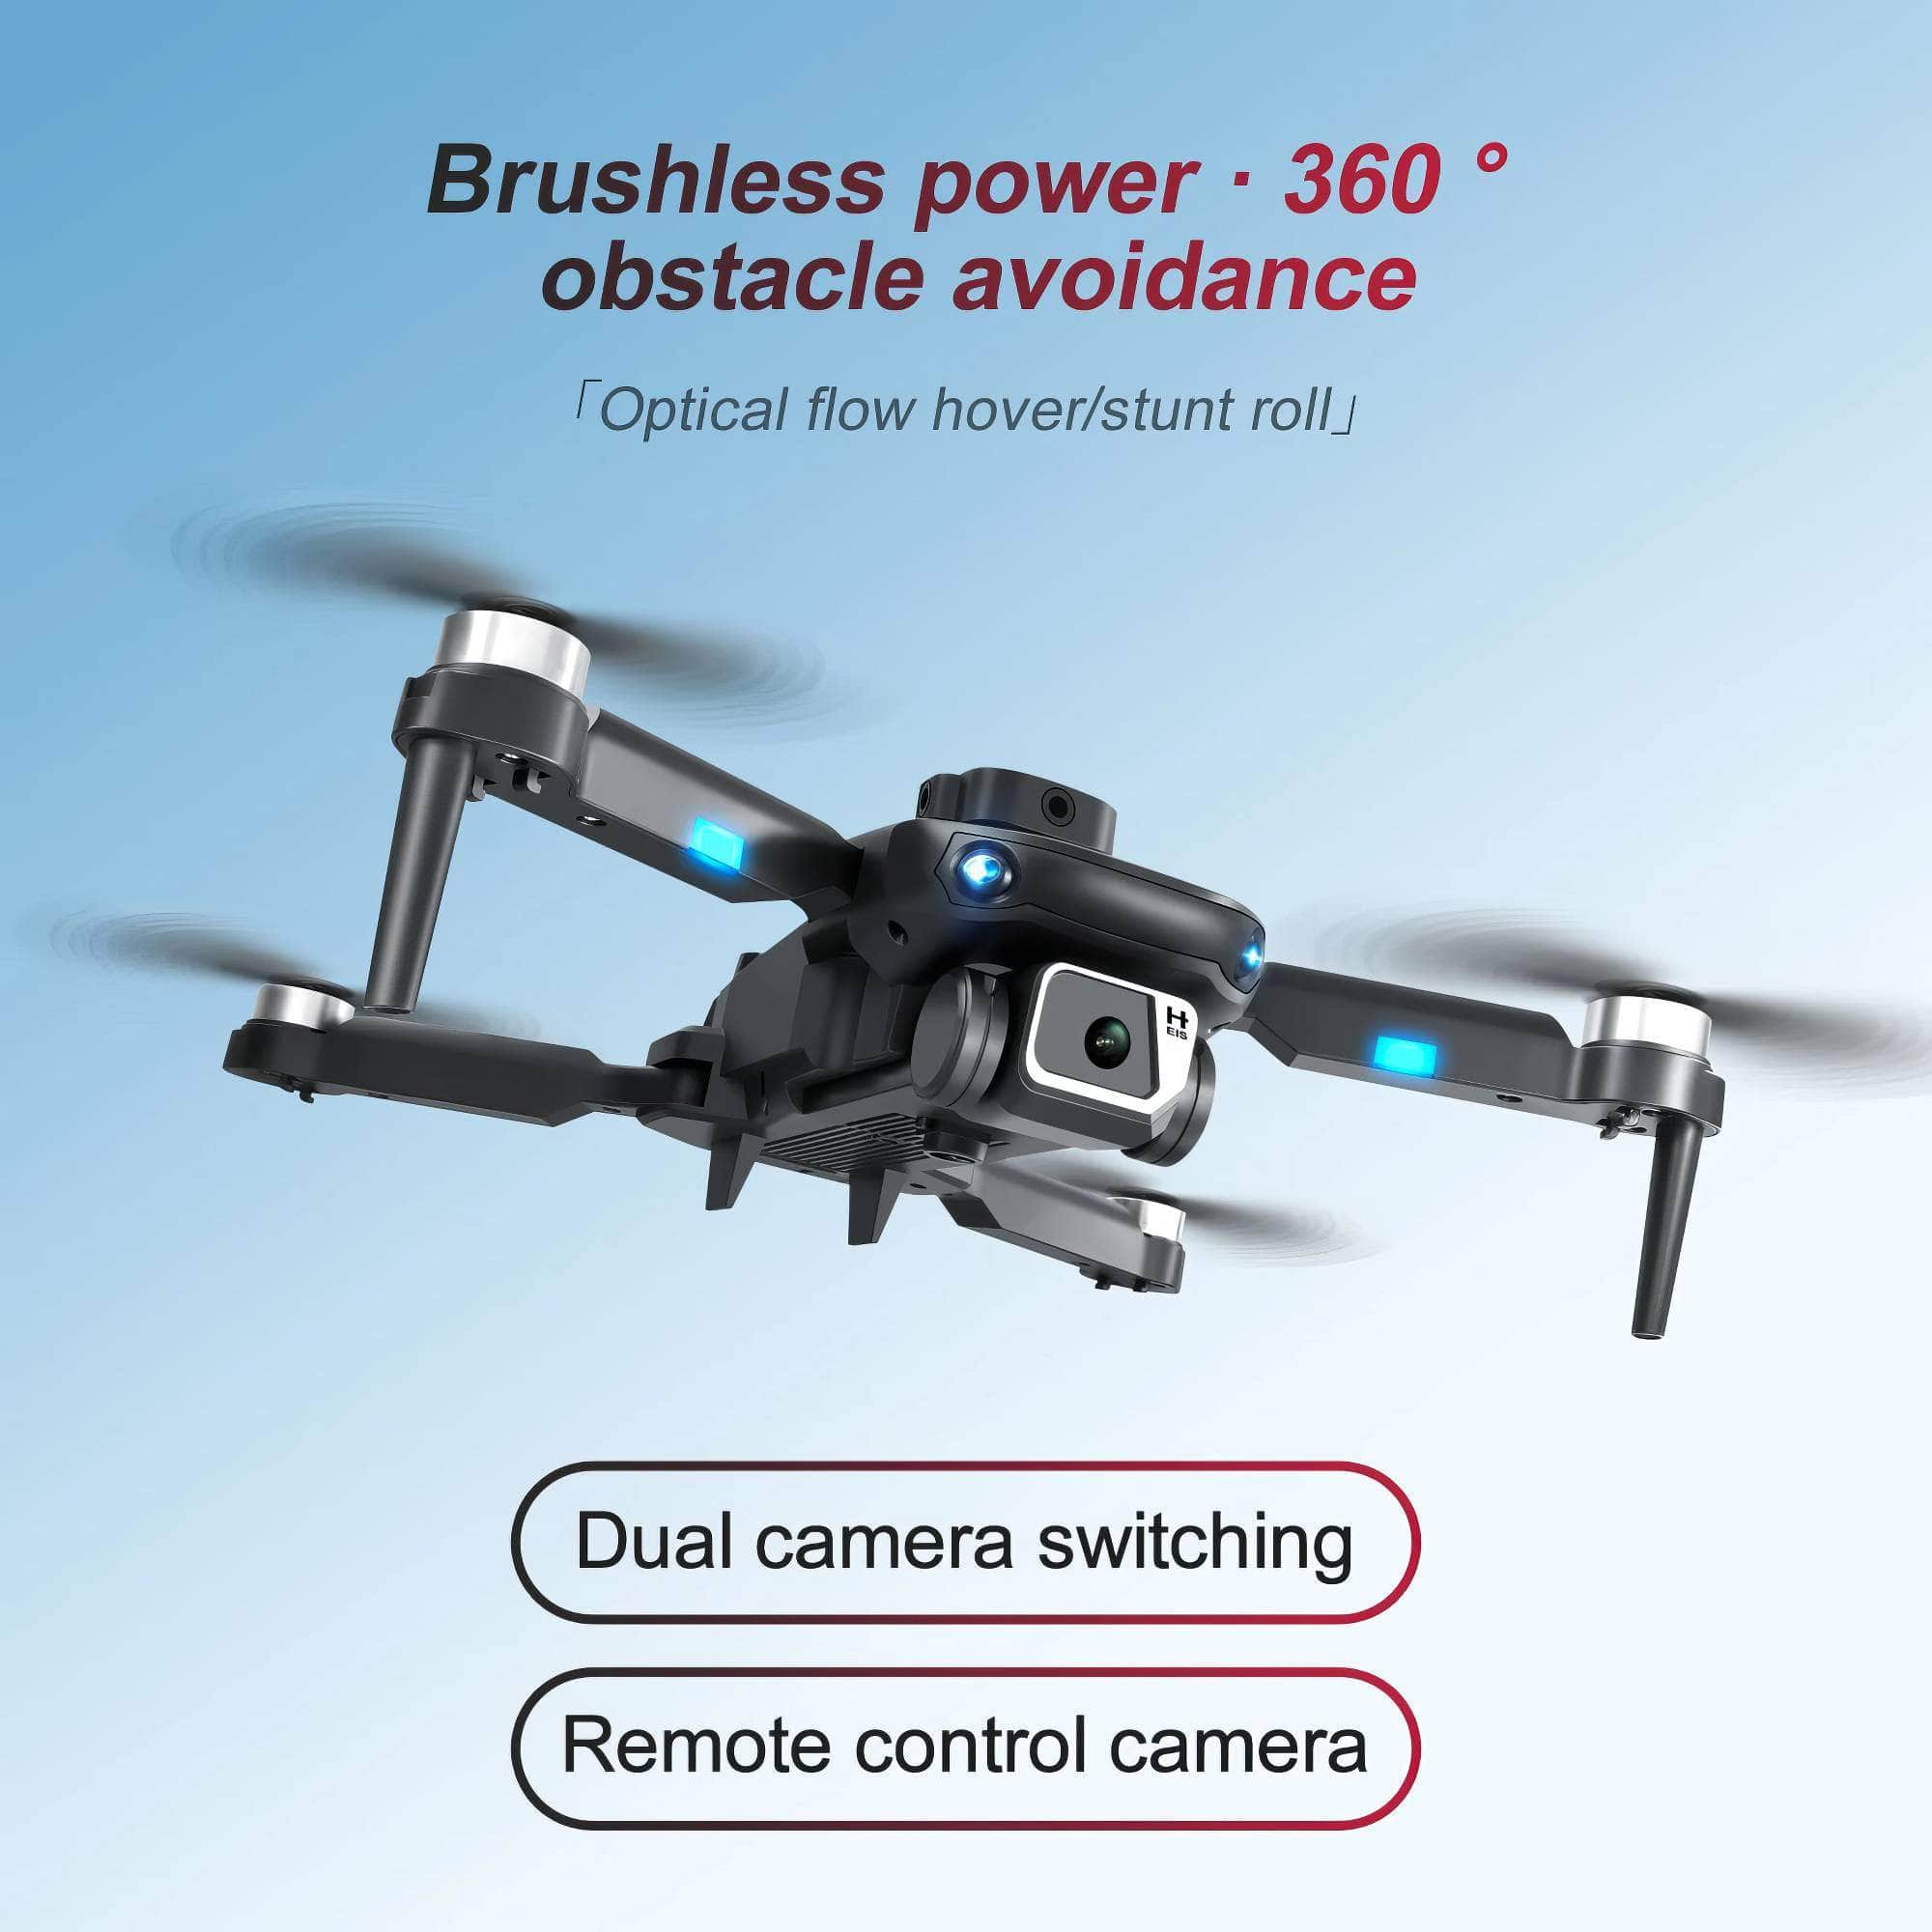 KBDFA D6 Mini 4K HD Camera Drone - Aerial Photography - Obstacle Avoidance - Foldable Quadcopter